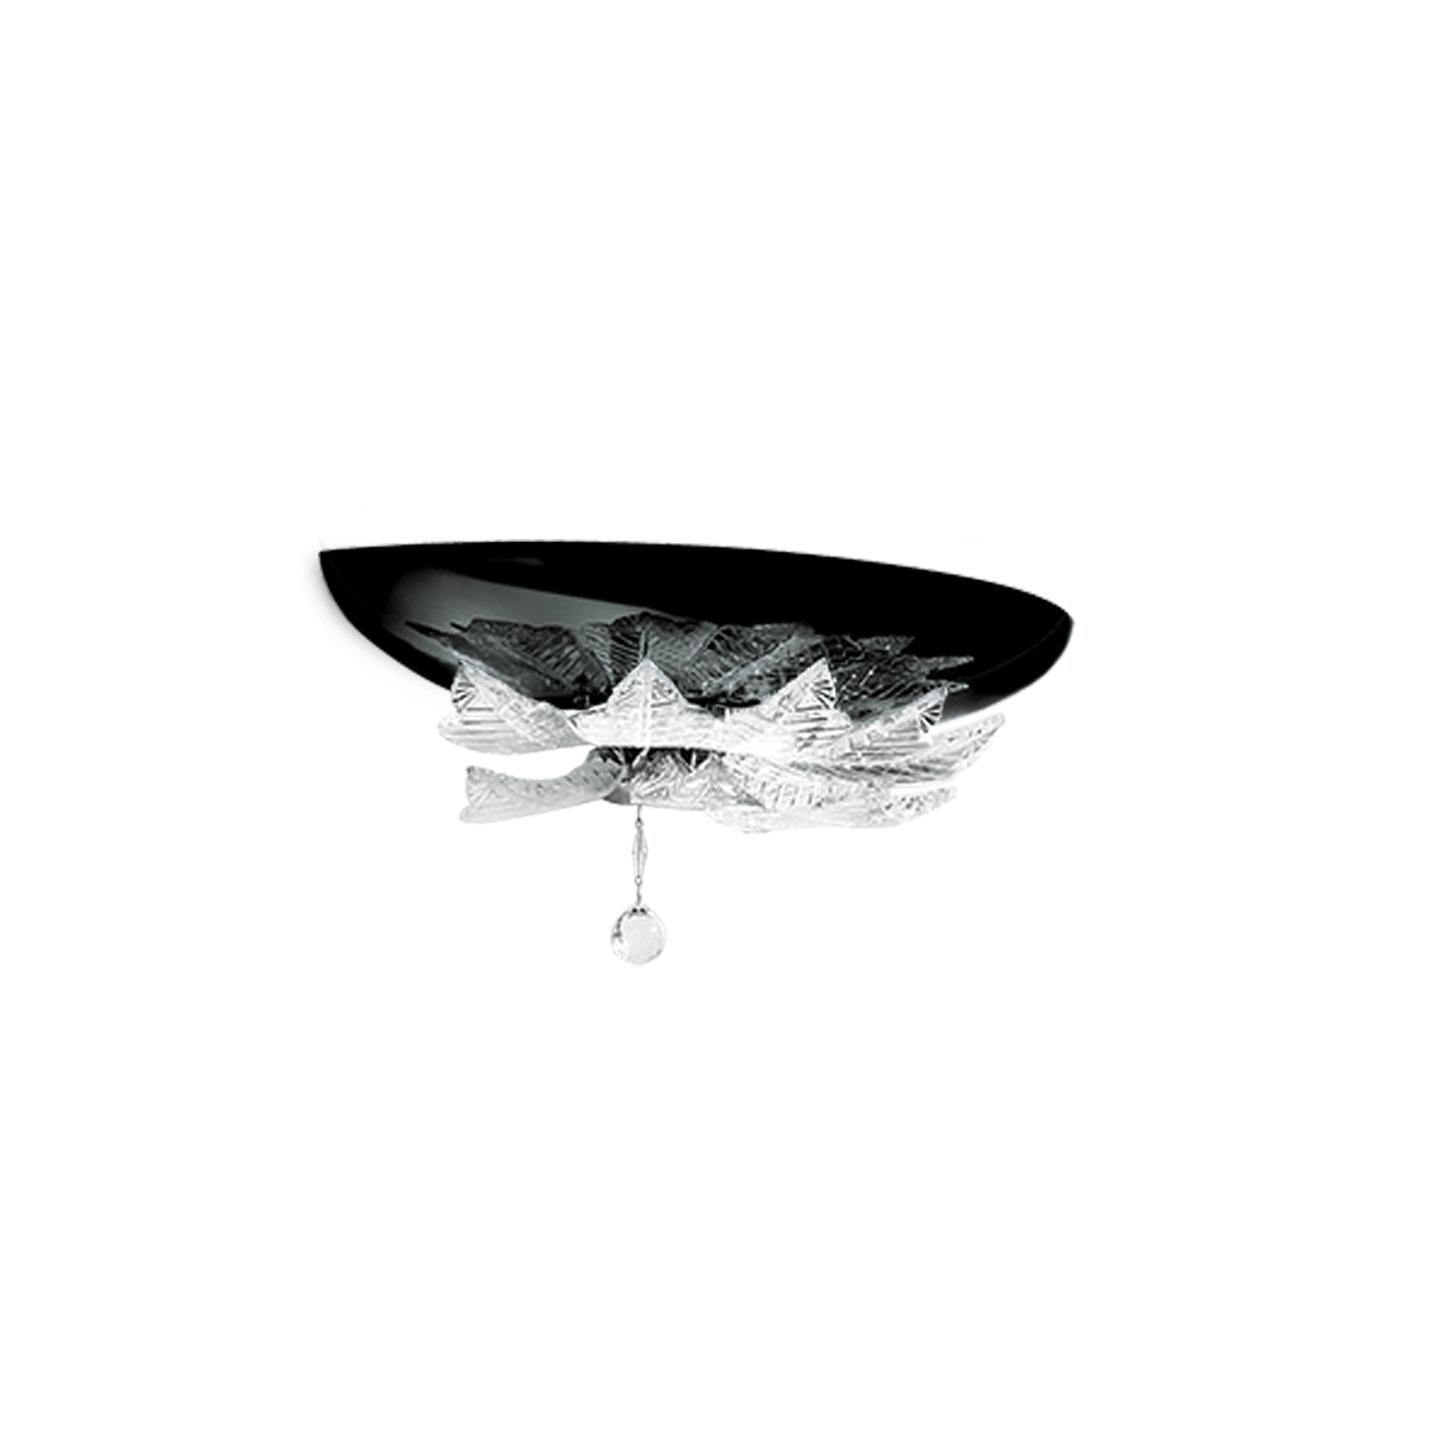 Leucos Orleans P Wall Light in Black and Crystal and Chrome by MariToscano